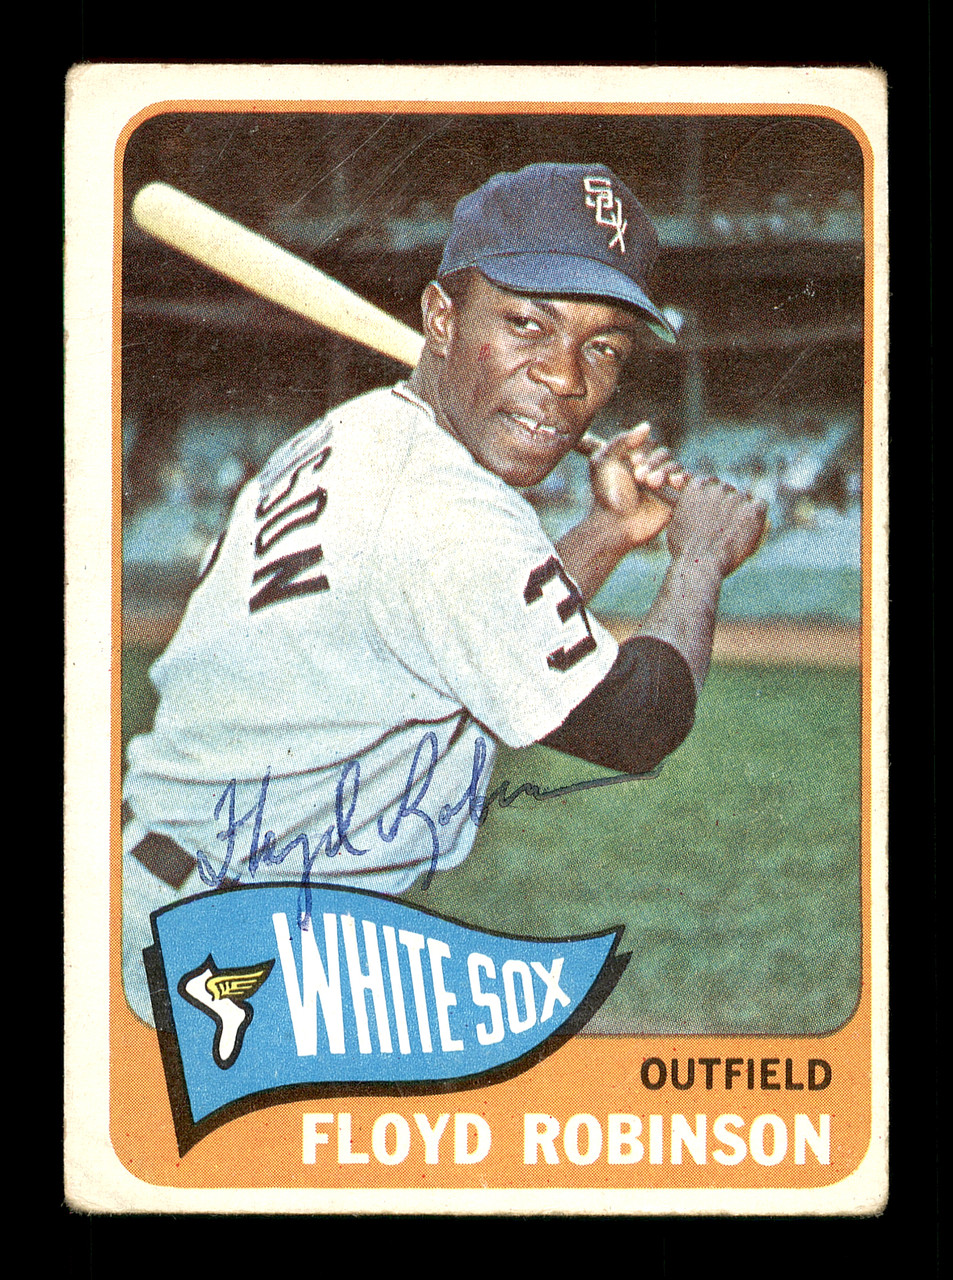 Floyd Robinson Autographed 1965 Topps Card #345 Chicago White Sox